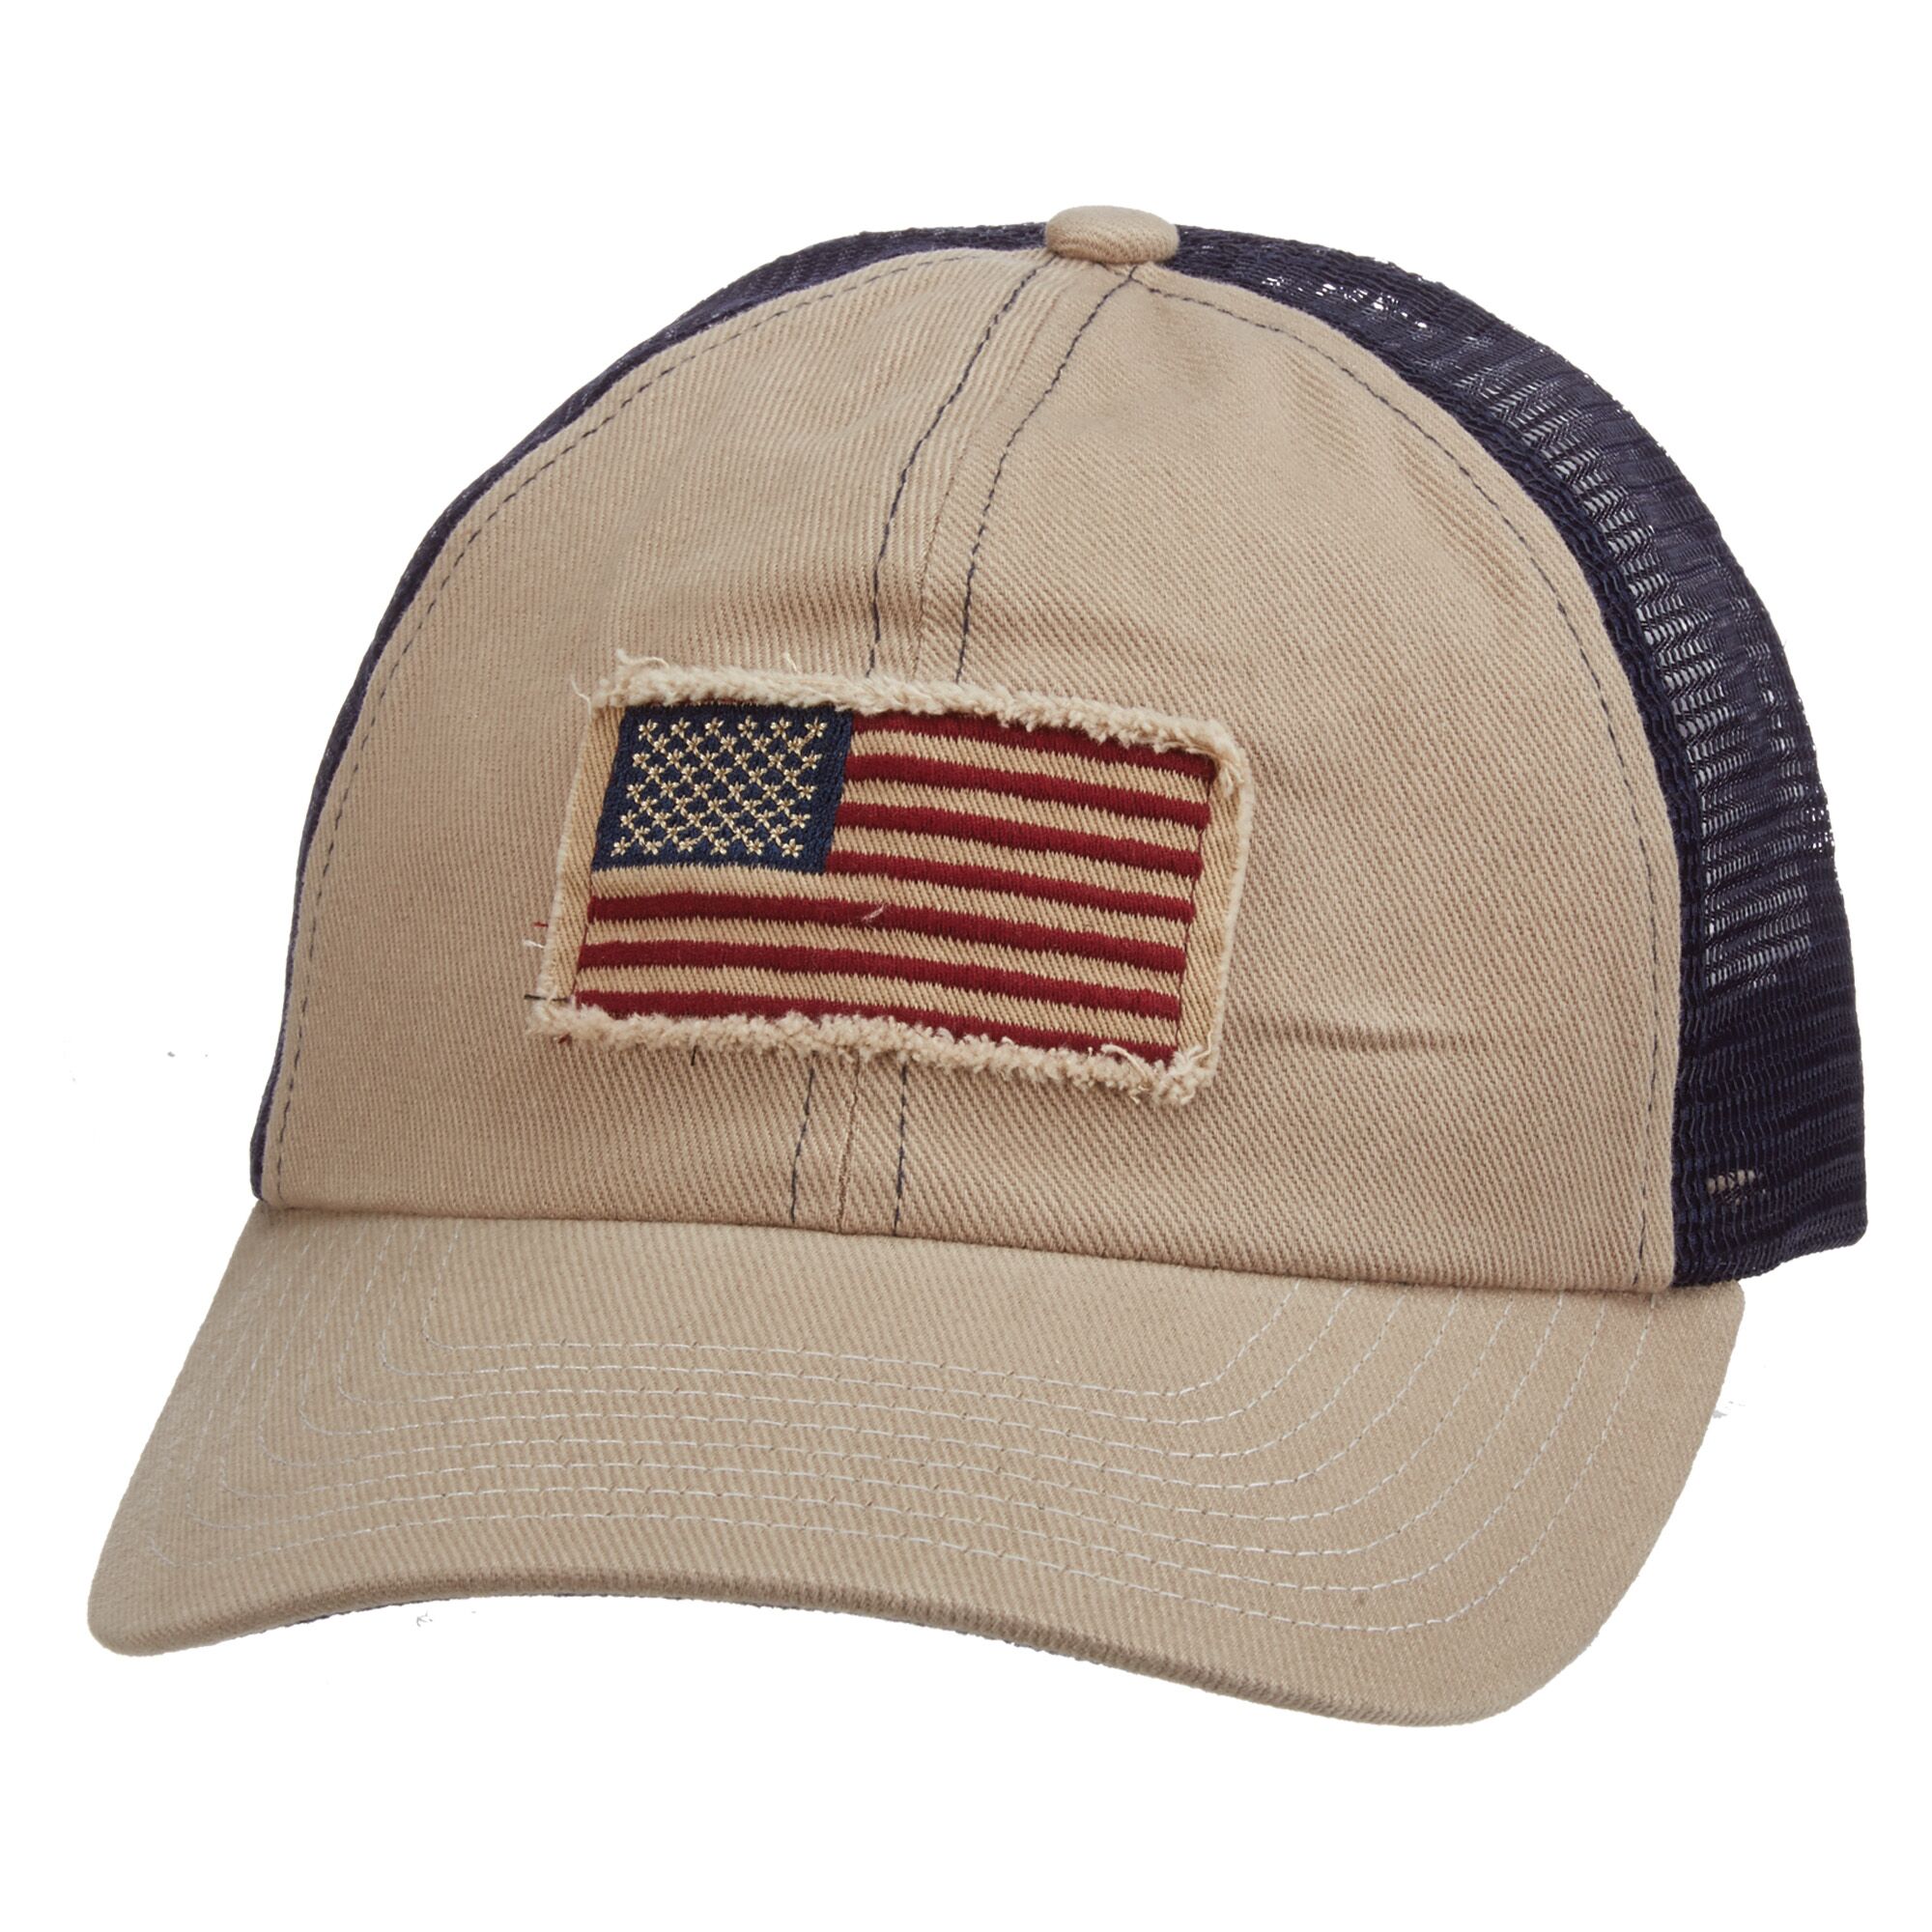 Unstructured Baseball Cap with Flag - Assorted Colors